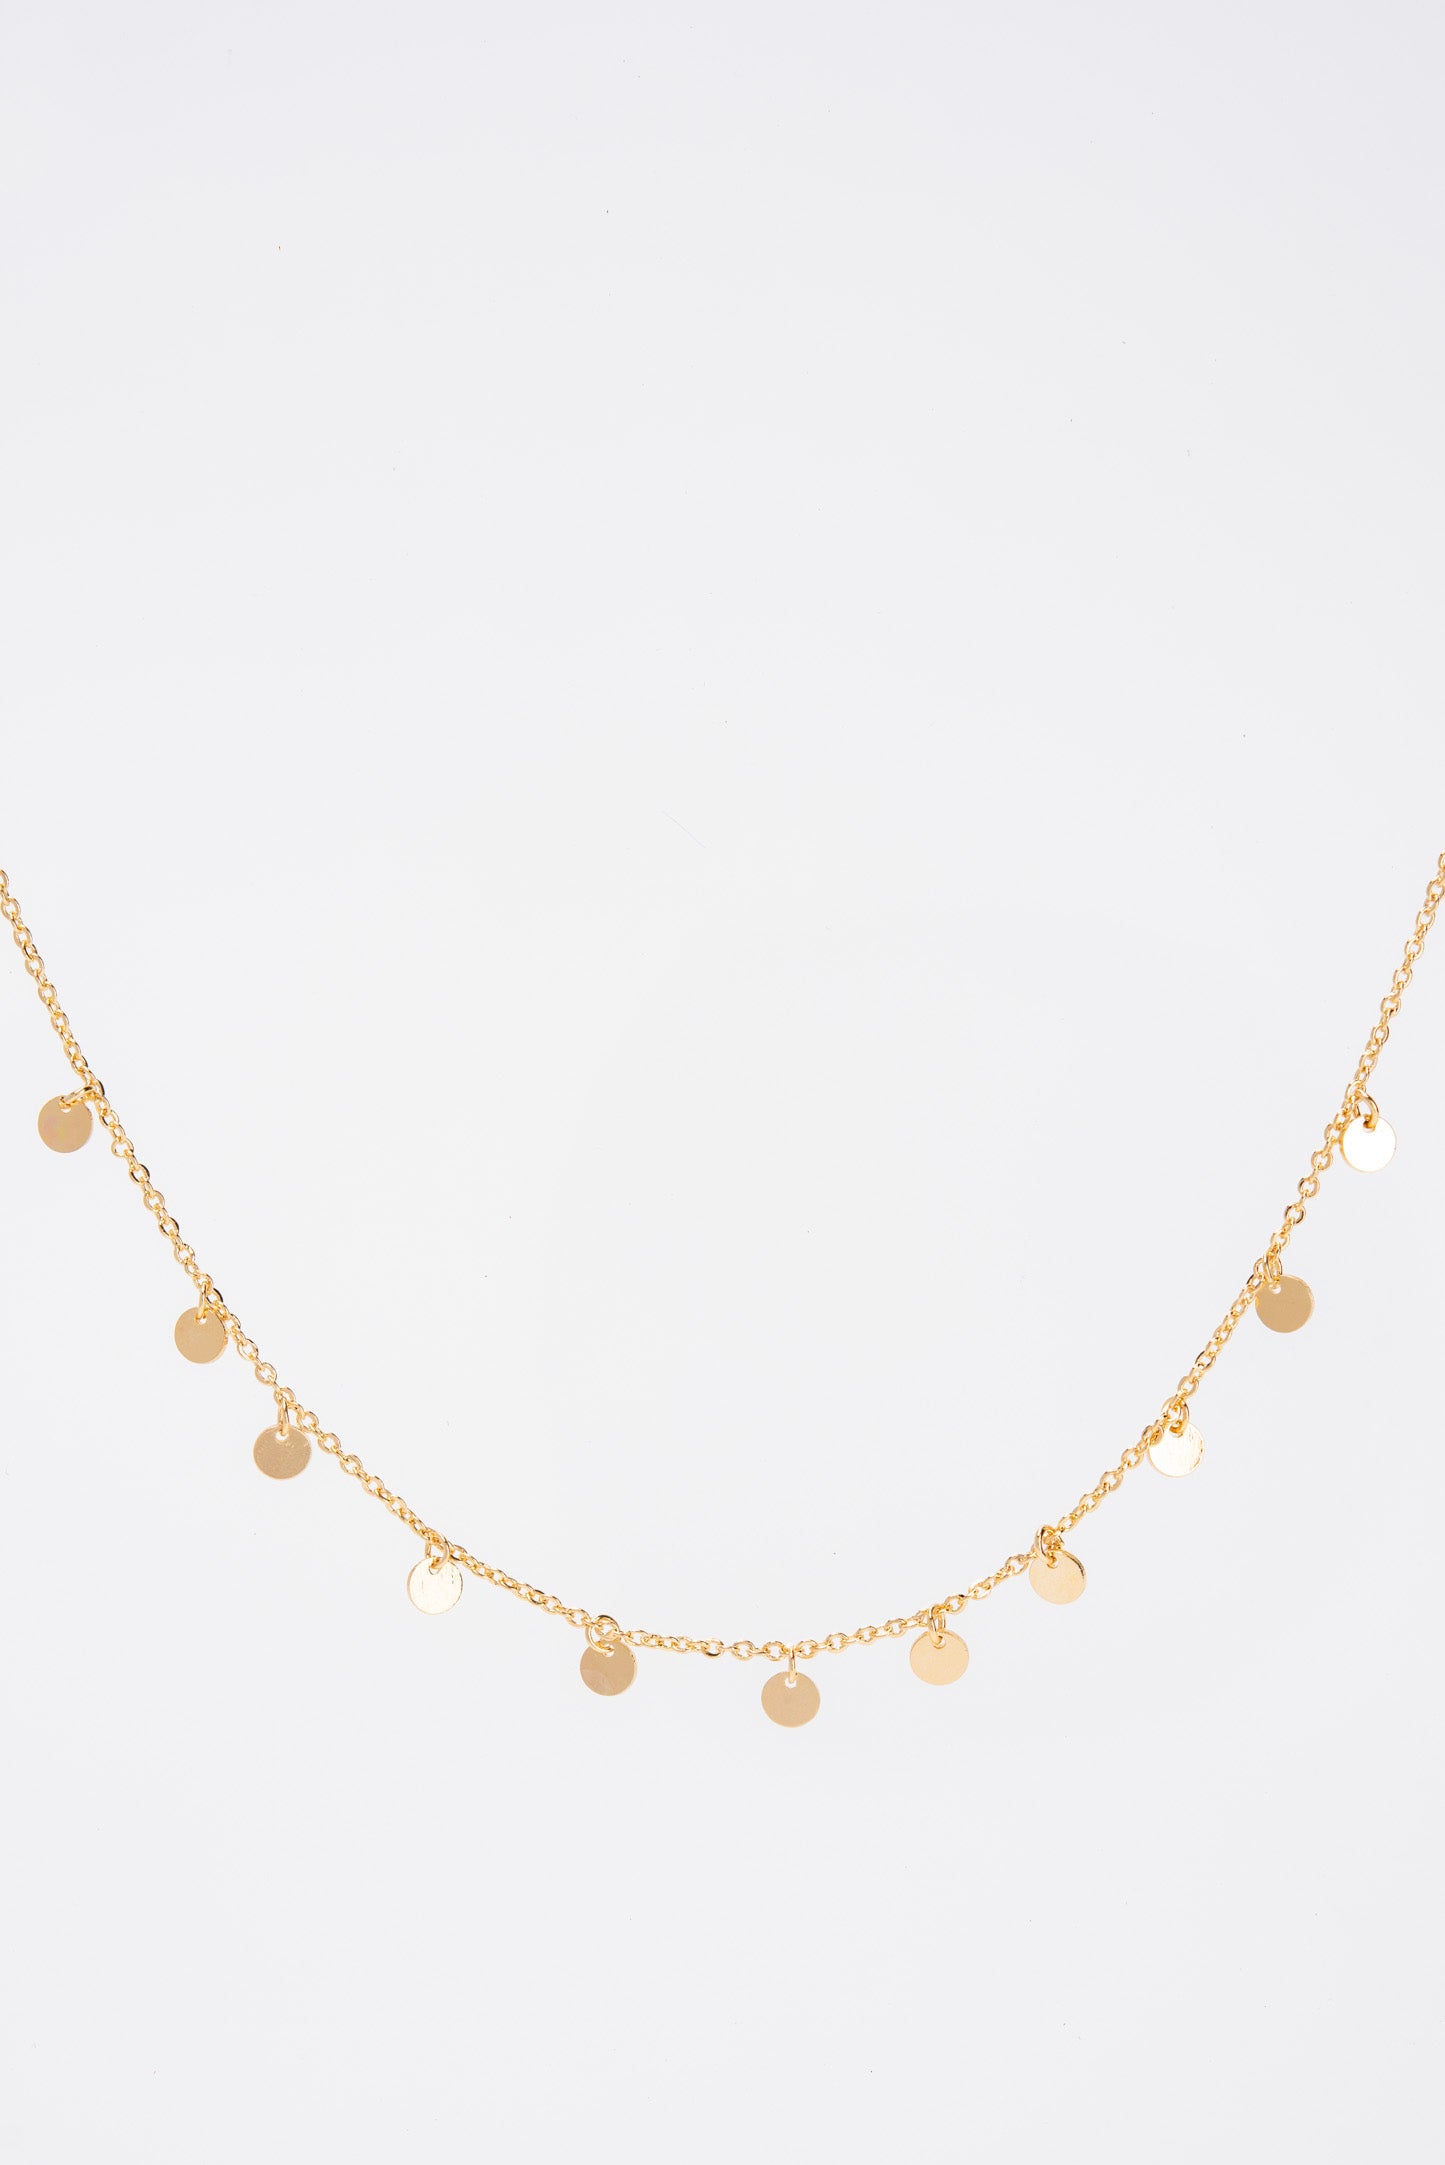 Lilly Gold Dipped Adjustable Disc Station Necklace - Gold